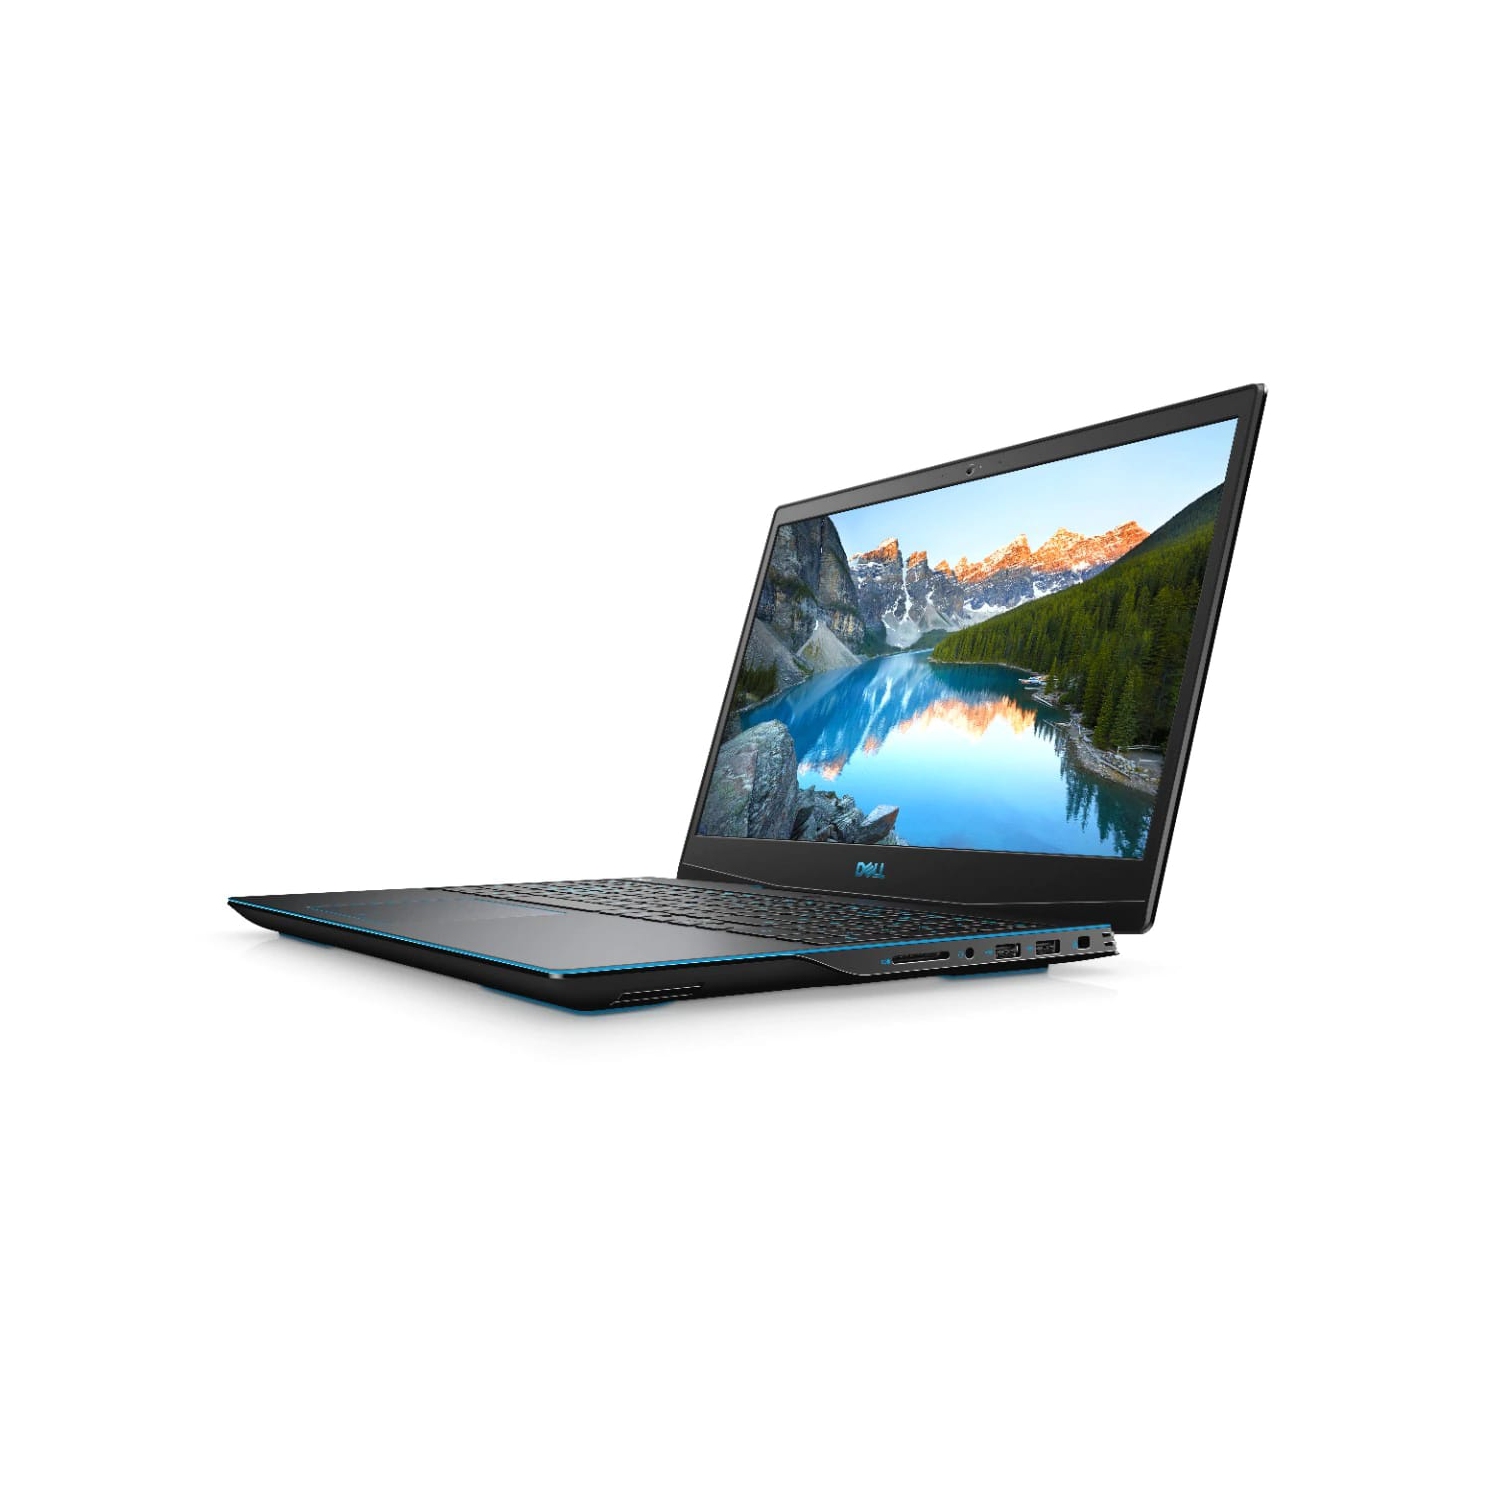 Refurbished (Excellent) – Dell G3 3500 Gaming Laptop (2020) | 15.6" FHD | Core i7 - 256GB SSD - 16GB RAM - RTX 2060 | Cores - 10th Gen CPU - 6GB GDDR6